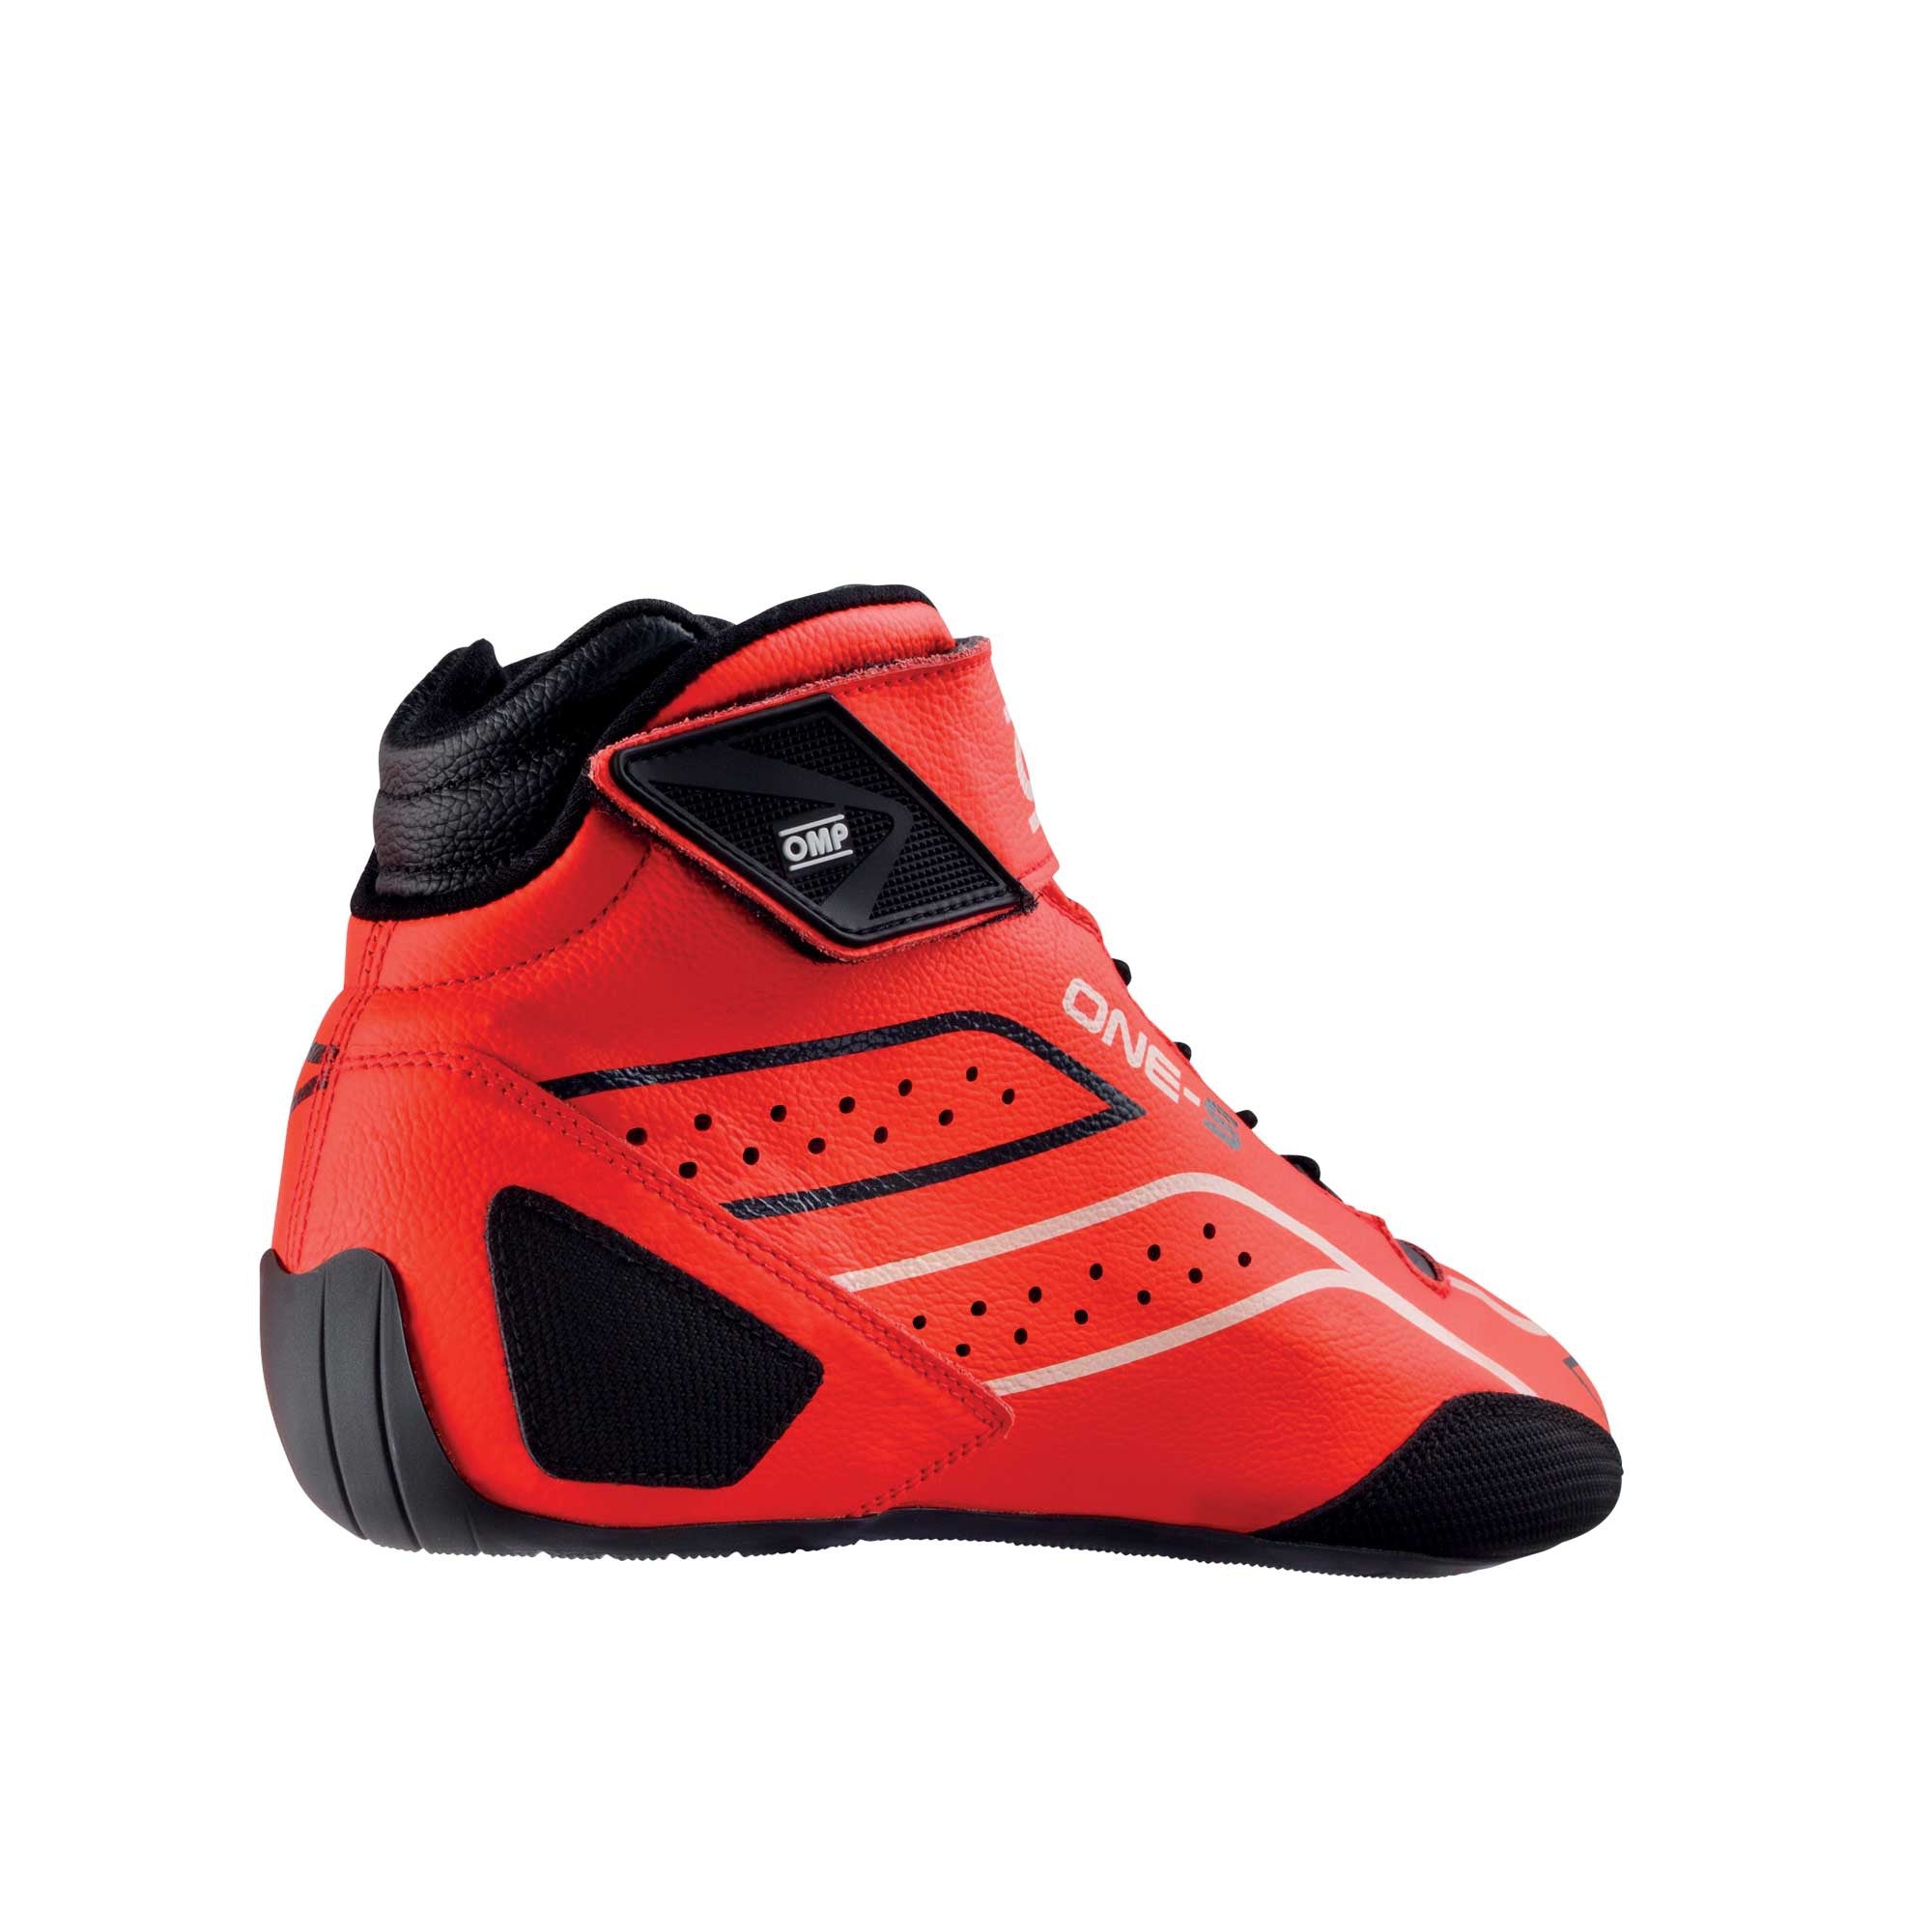 OMP RACING SHOE ONE-S - Car Racing Shoes Supplier - Ontario & Quebec - Paragon Competition